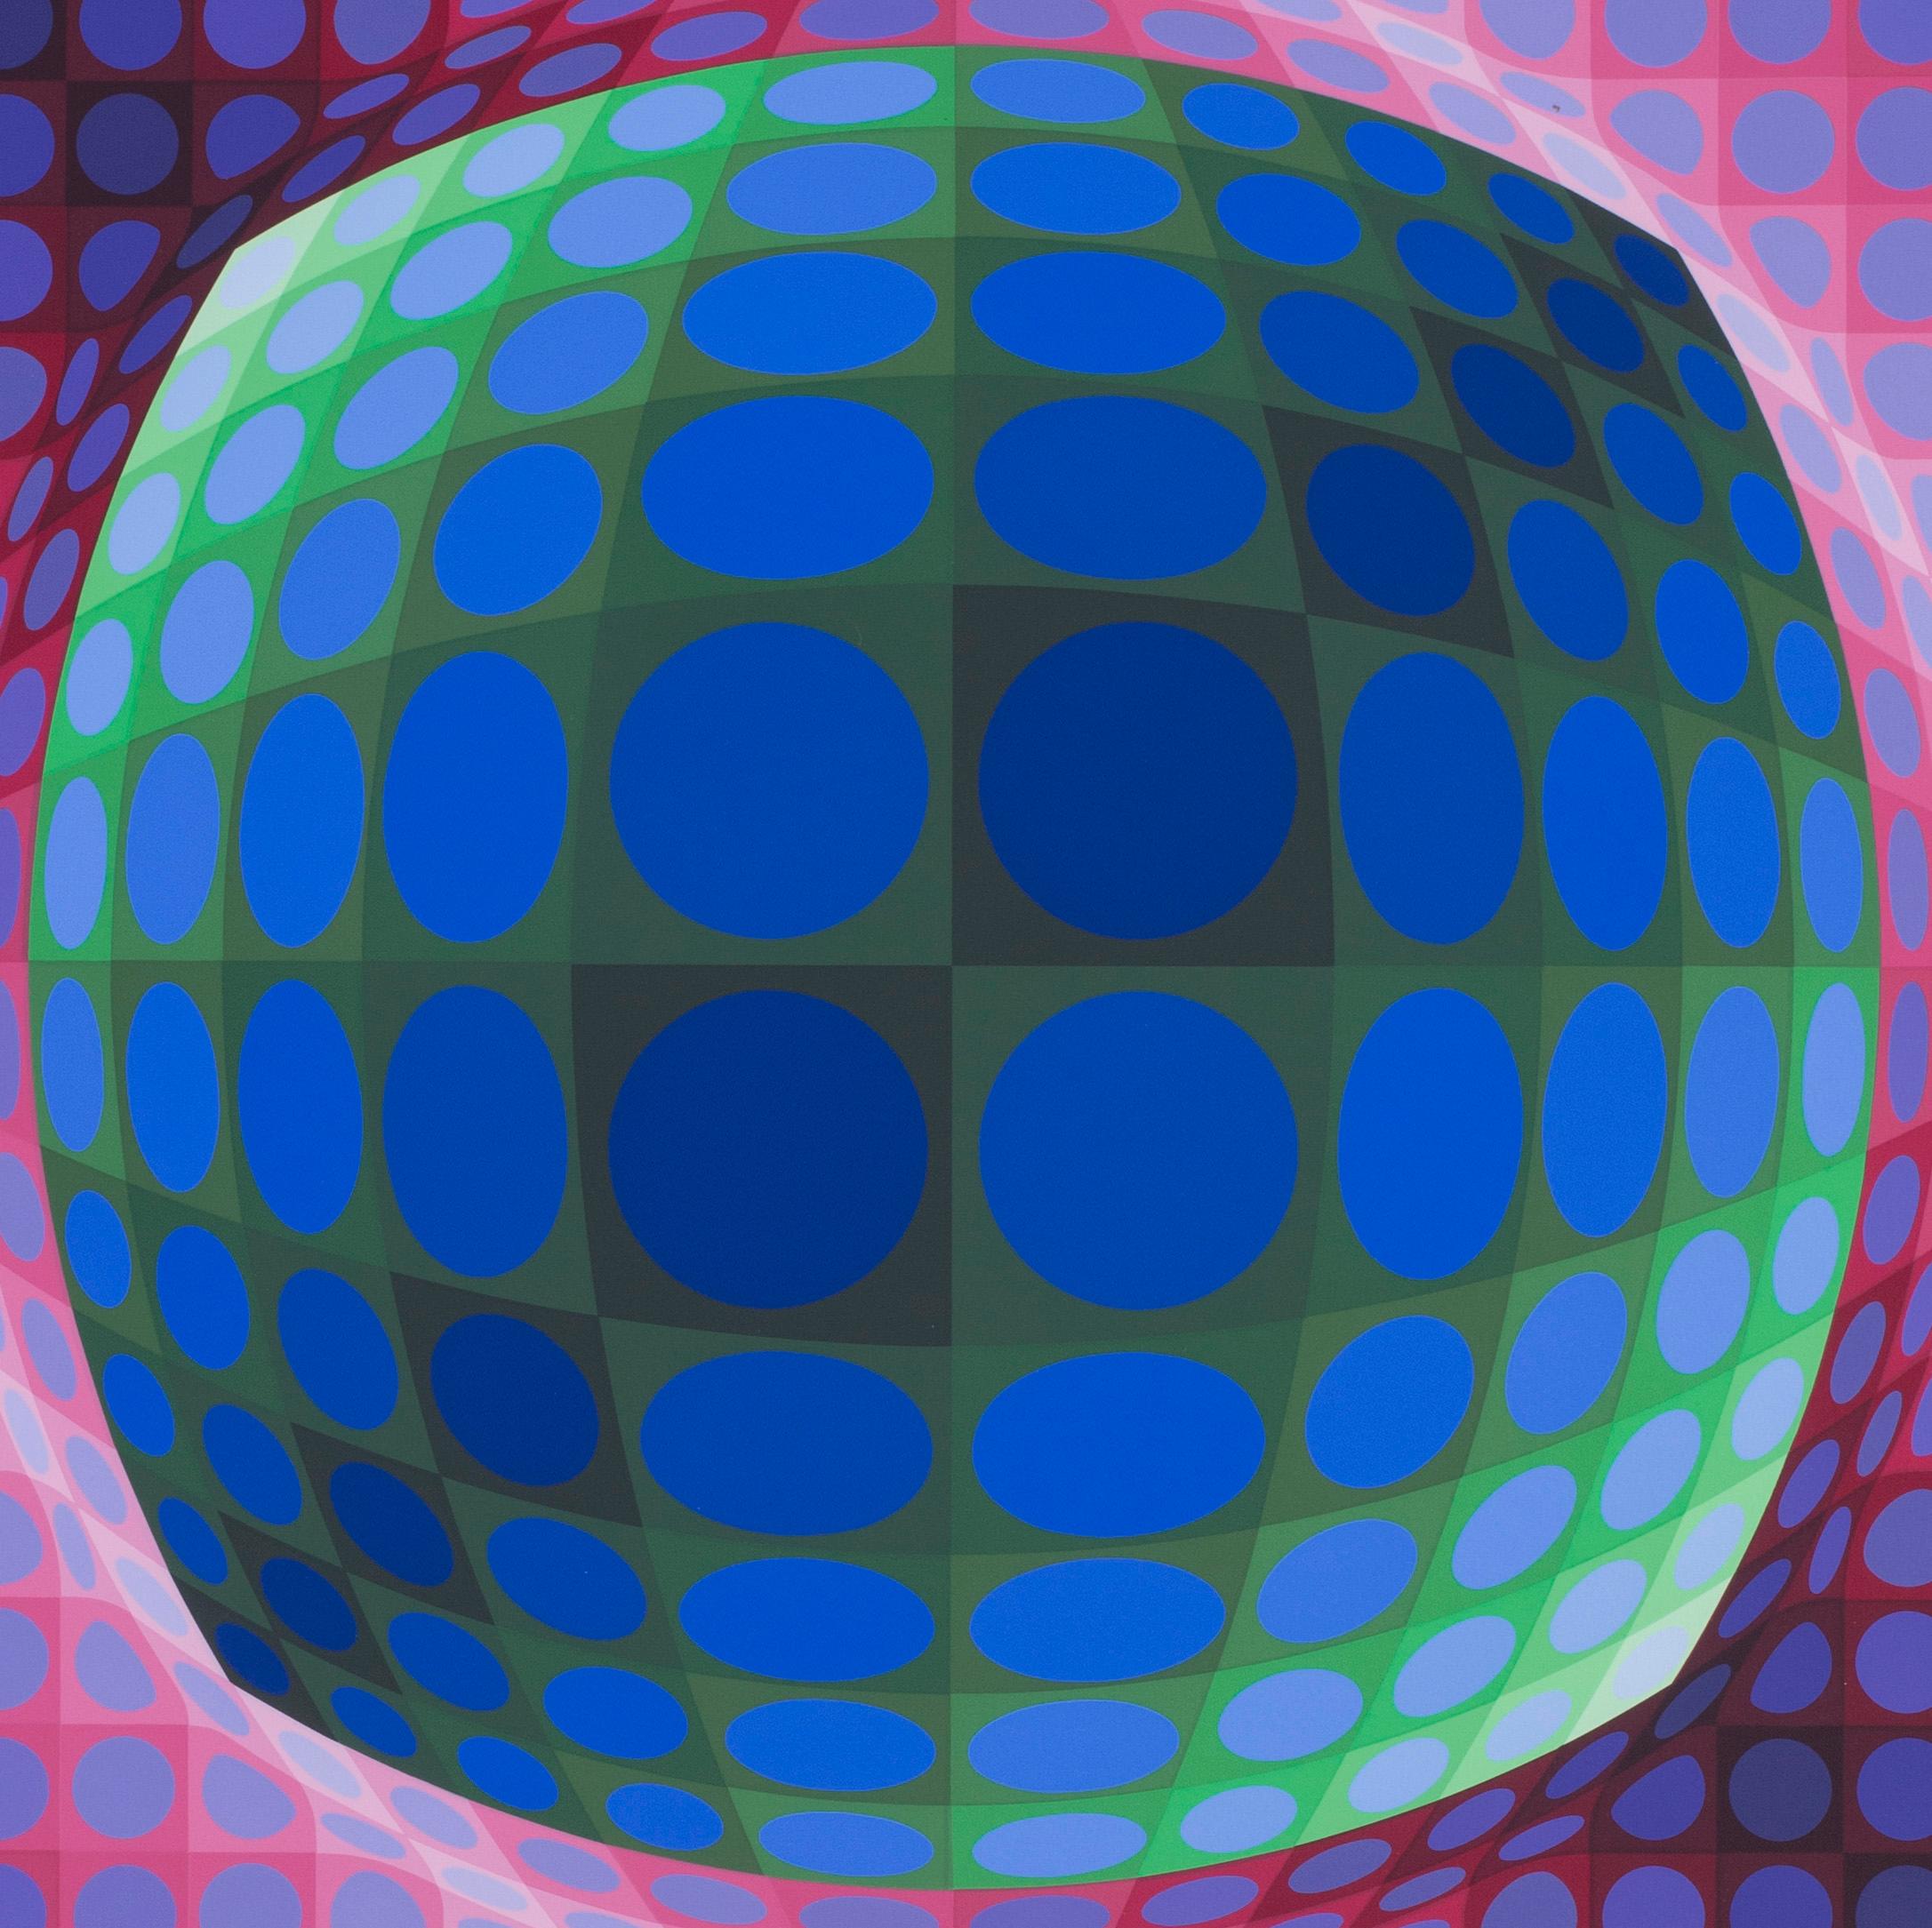 Syry, 1978 - Print by Victor Vasarely